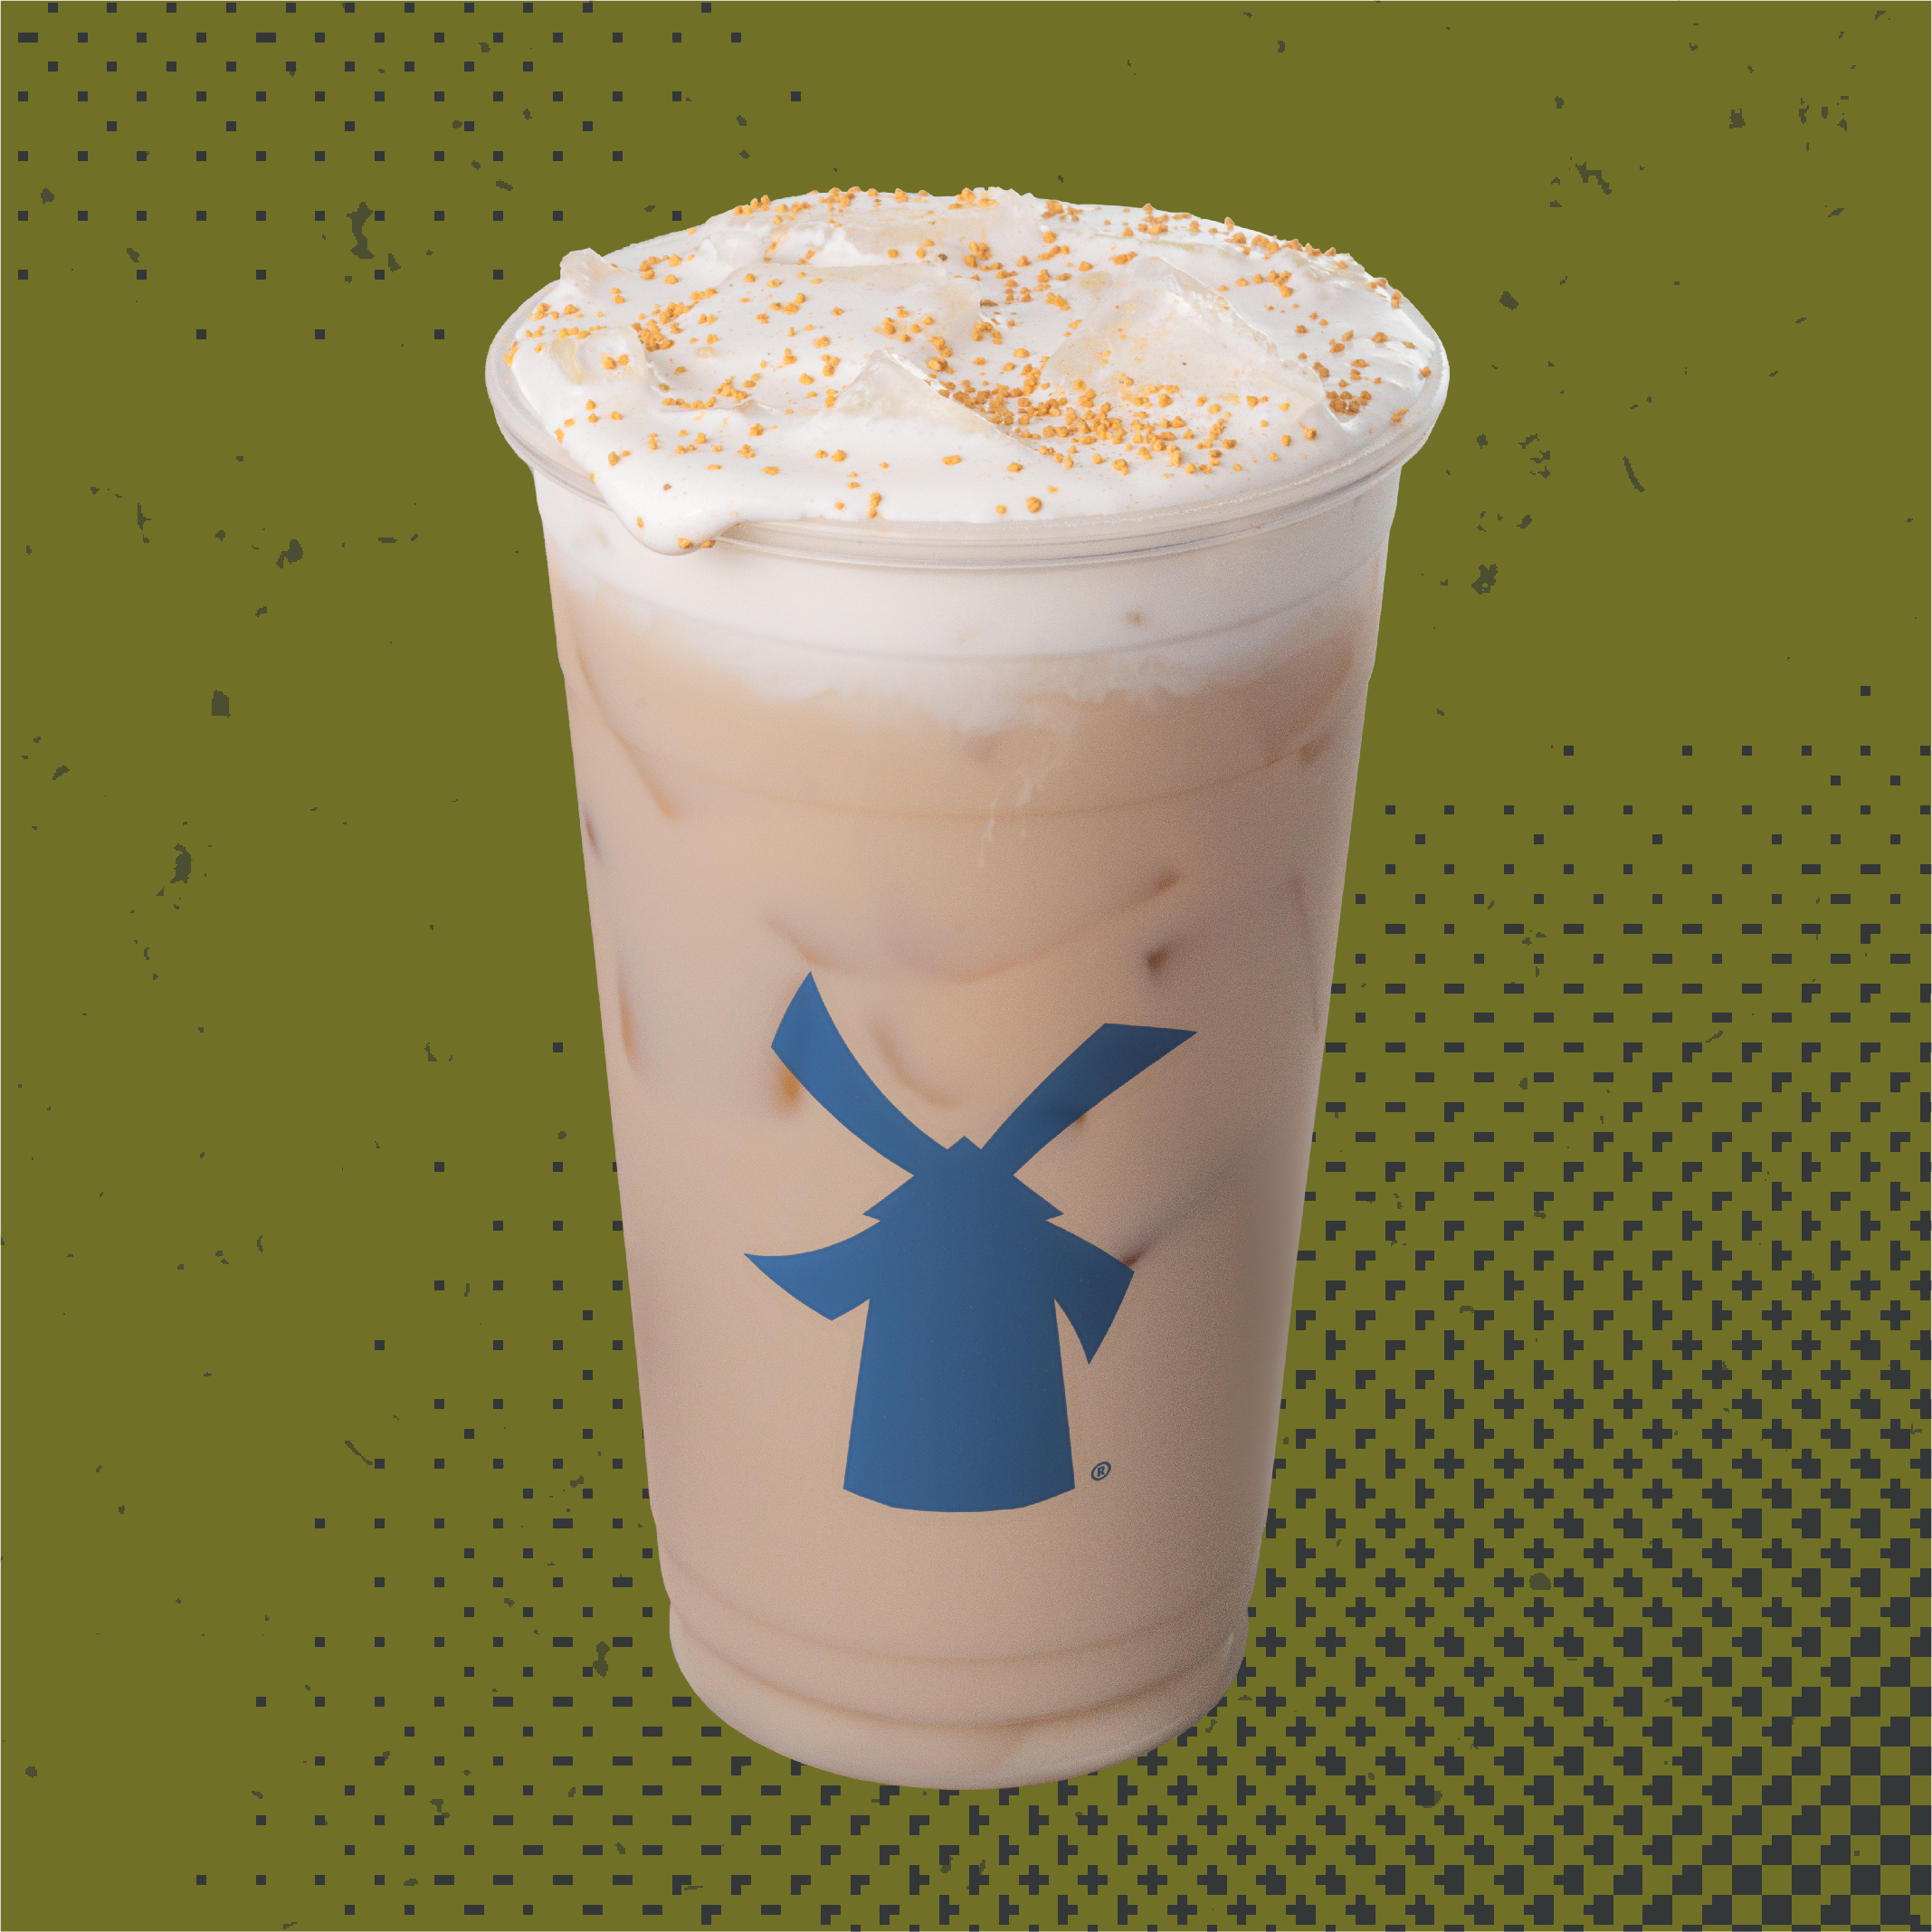 Sweater Weather Chai: Features chai, white coffee and white chocolate flavor topped with Soft Top and cinnamon/nutmeg sprinks.